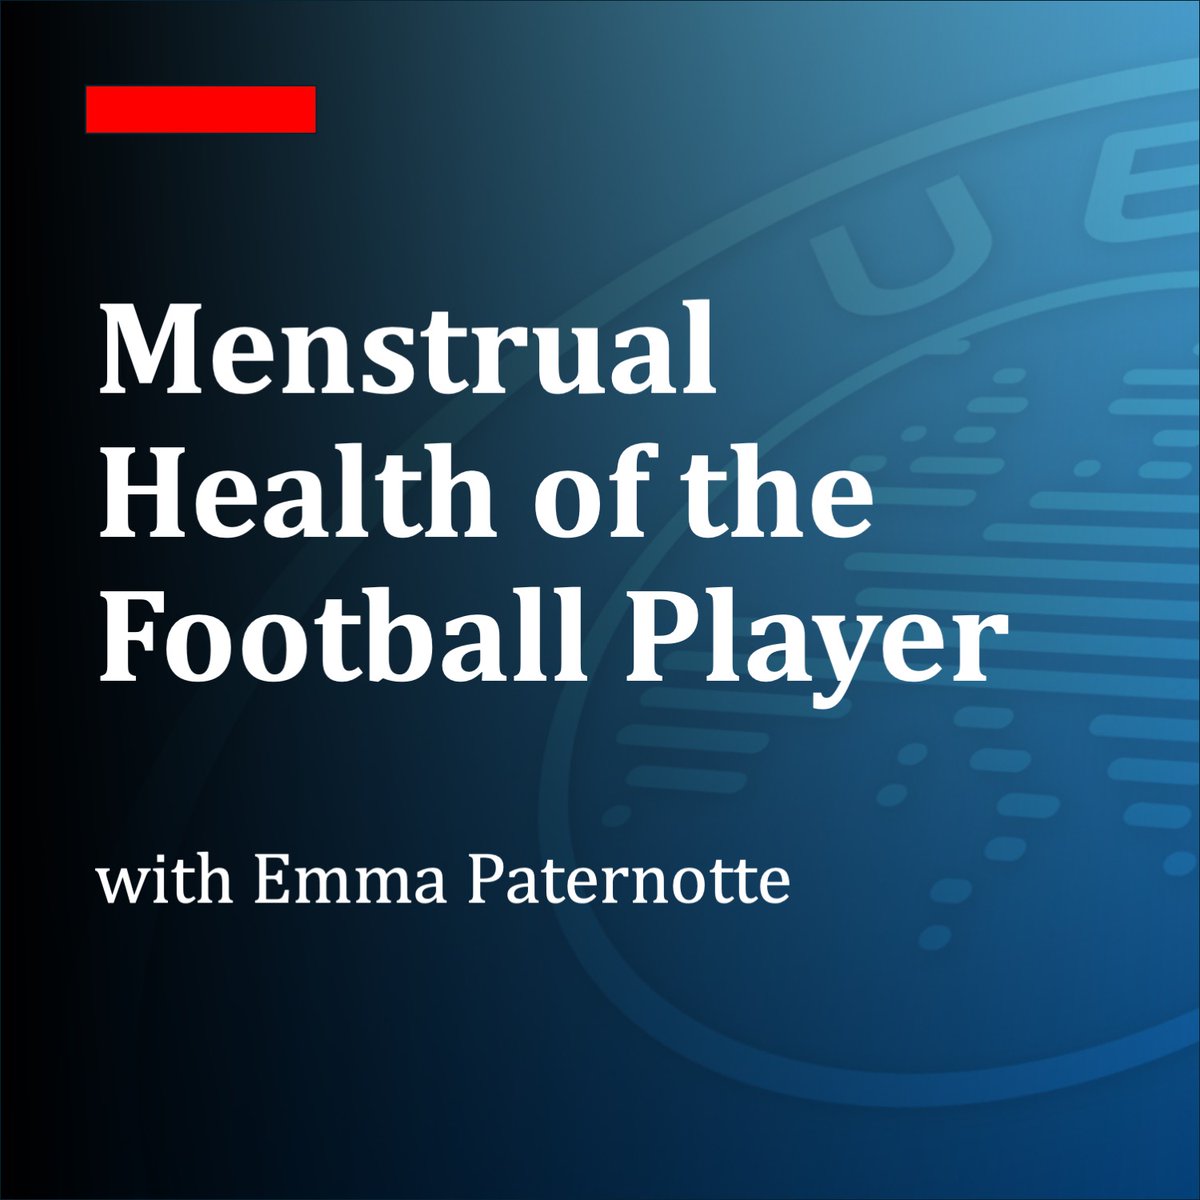 Our latest @UEFA Medical Podcast highlights clinical aspects of menstrual health in football players. We invited @EmmaPaternotte to share her vast expertise. You can access our podcast via Apple Podcasts, Spotify, or directly: uefamedical.buzzsprout.com